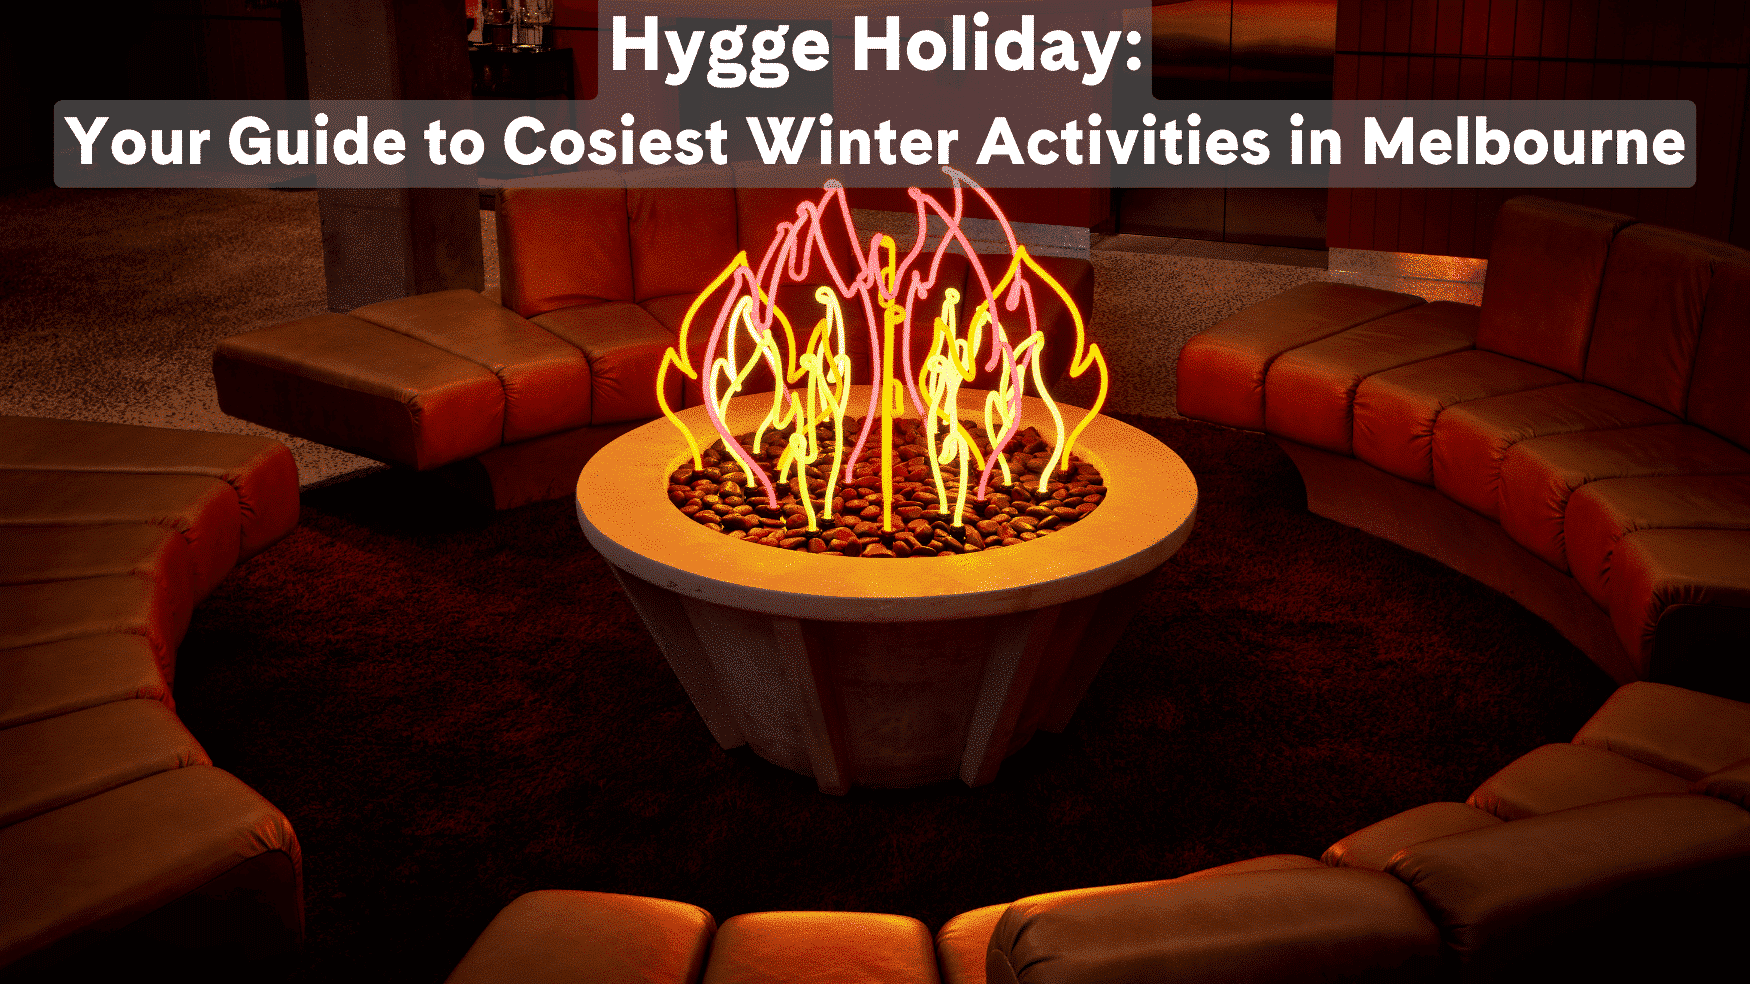 Hygge Holiday: Your Guide to the Cosiest Activities in Melbourne